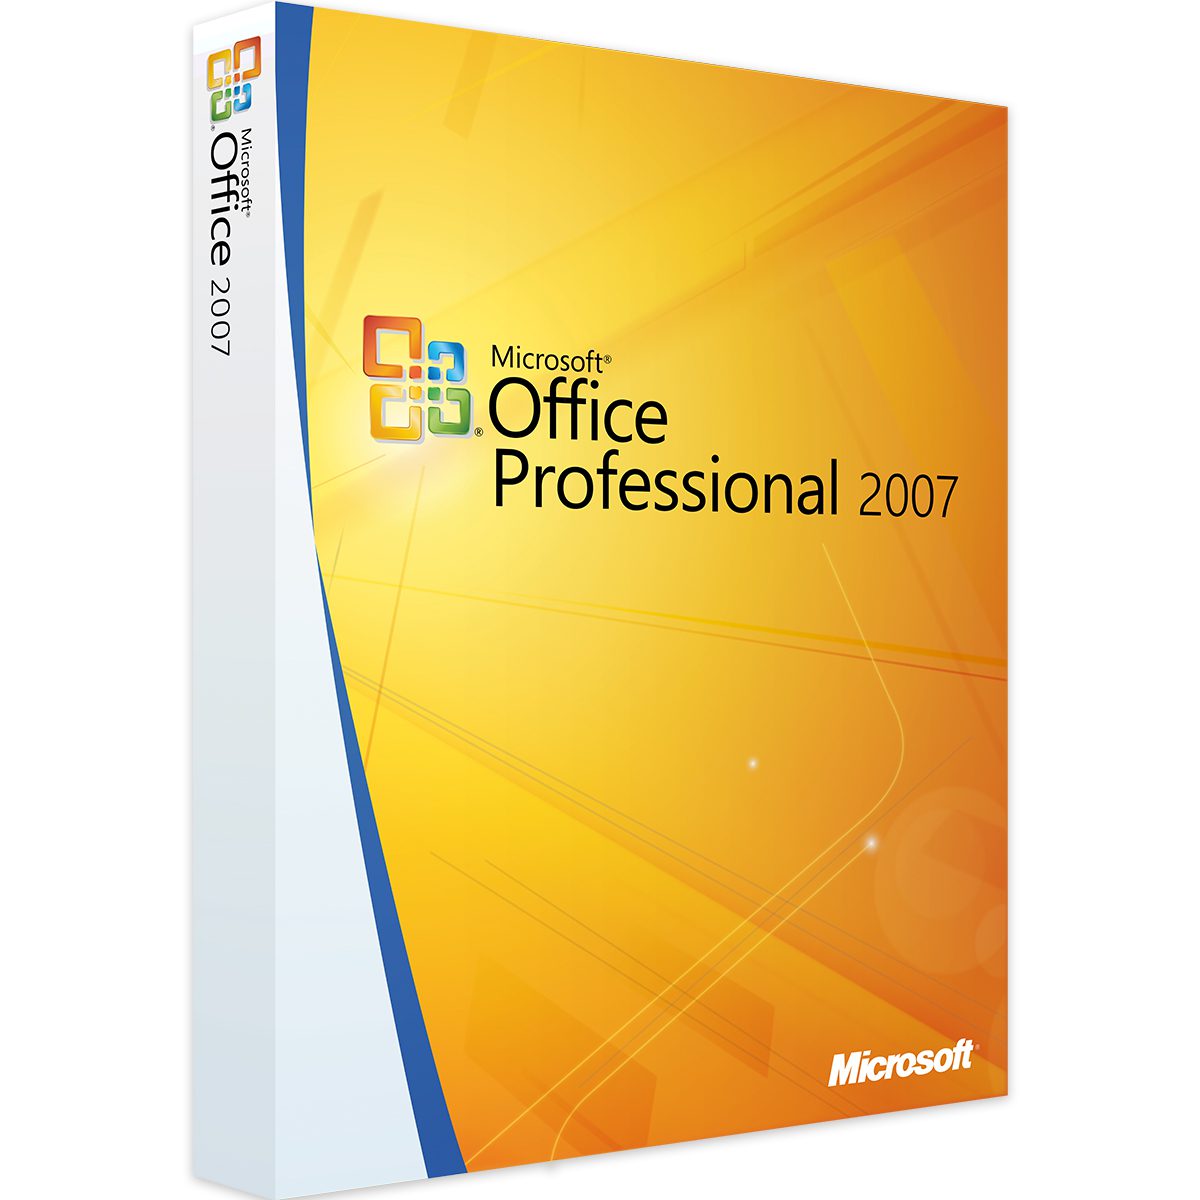 Download Microsoft Office 2007 With Products keys